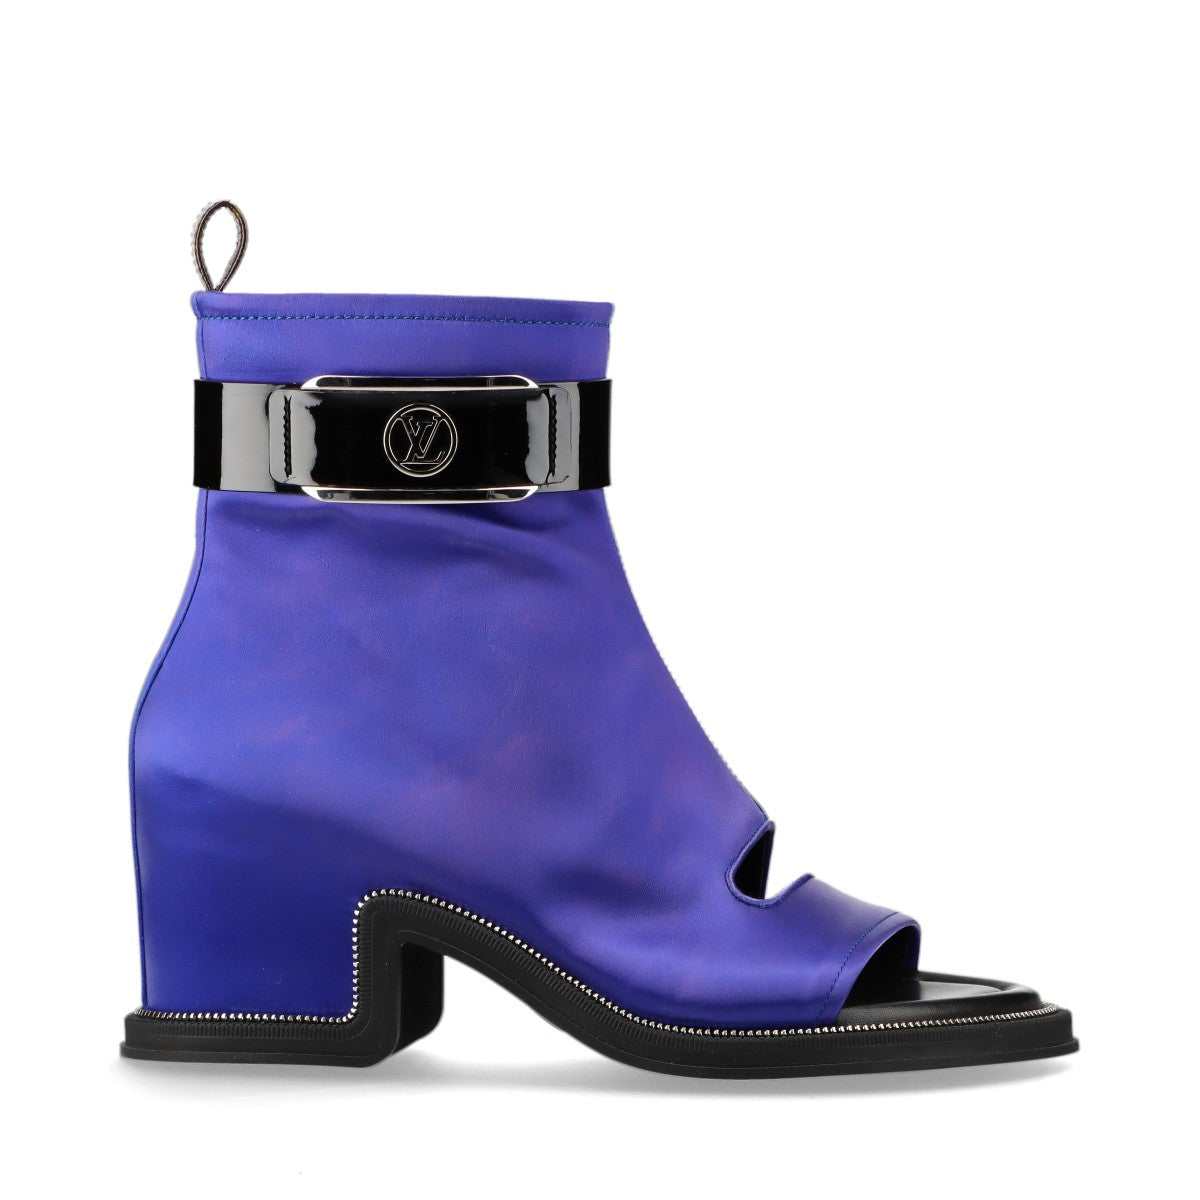 Louis Vuitton moonlight line 22 years Satin x Leather Short Boots EU38 Ladies' Blue x Black NL0212 Box There is a bag